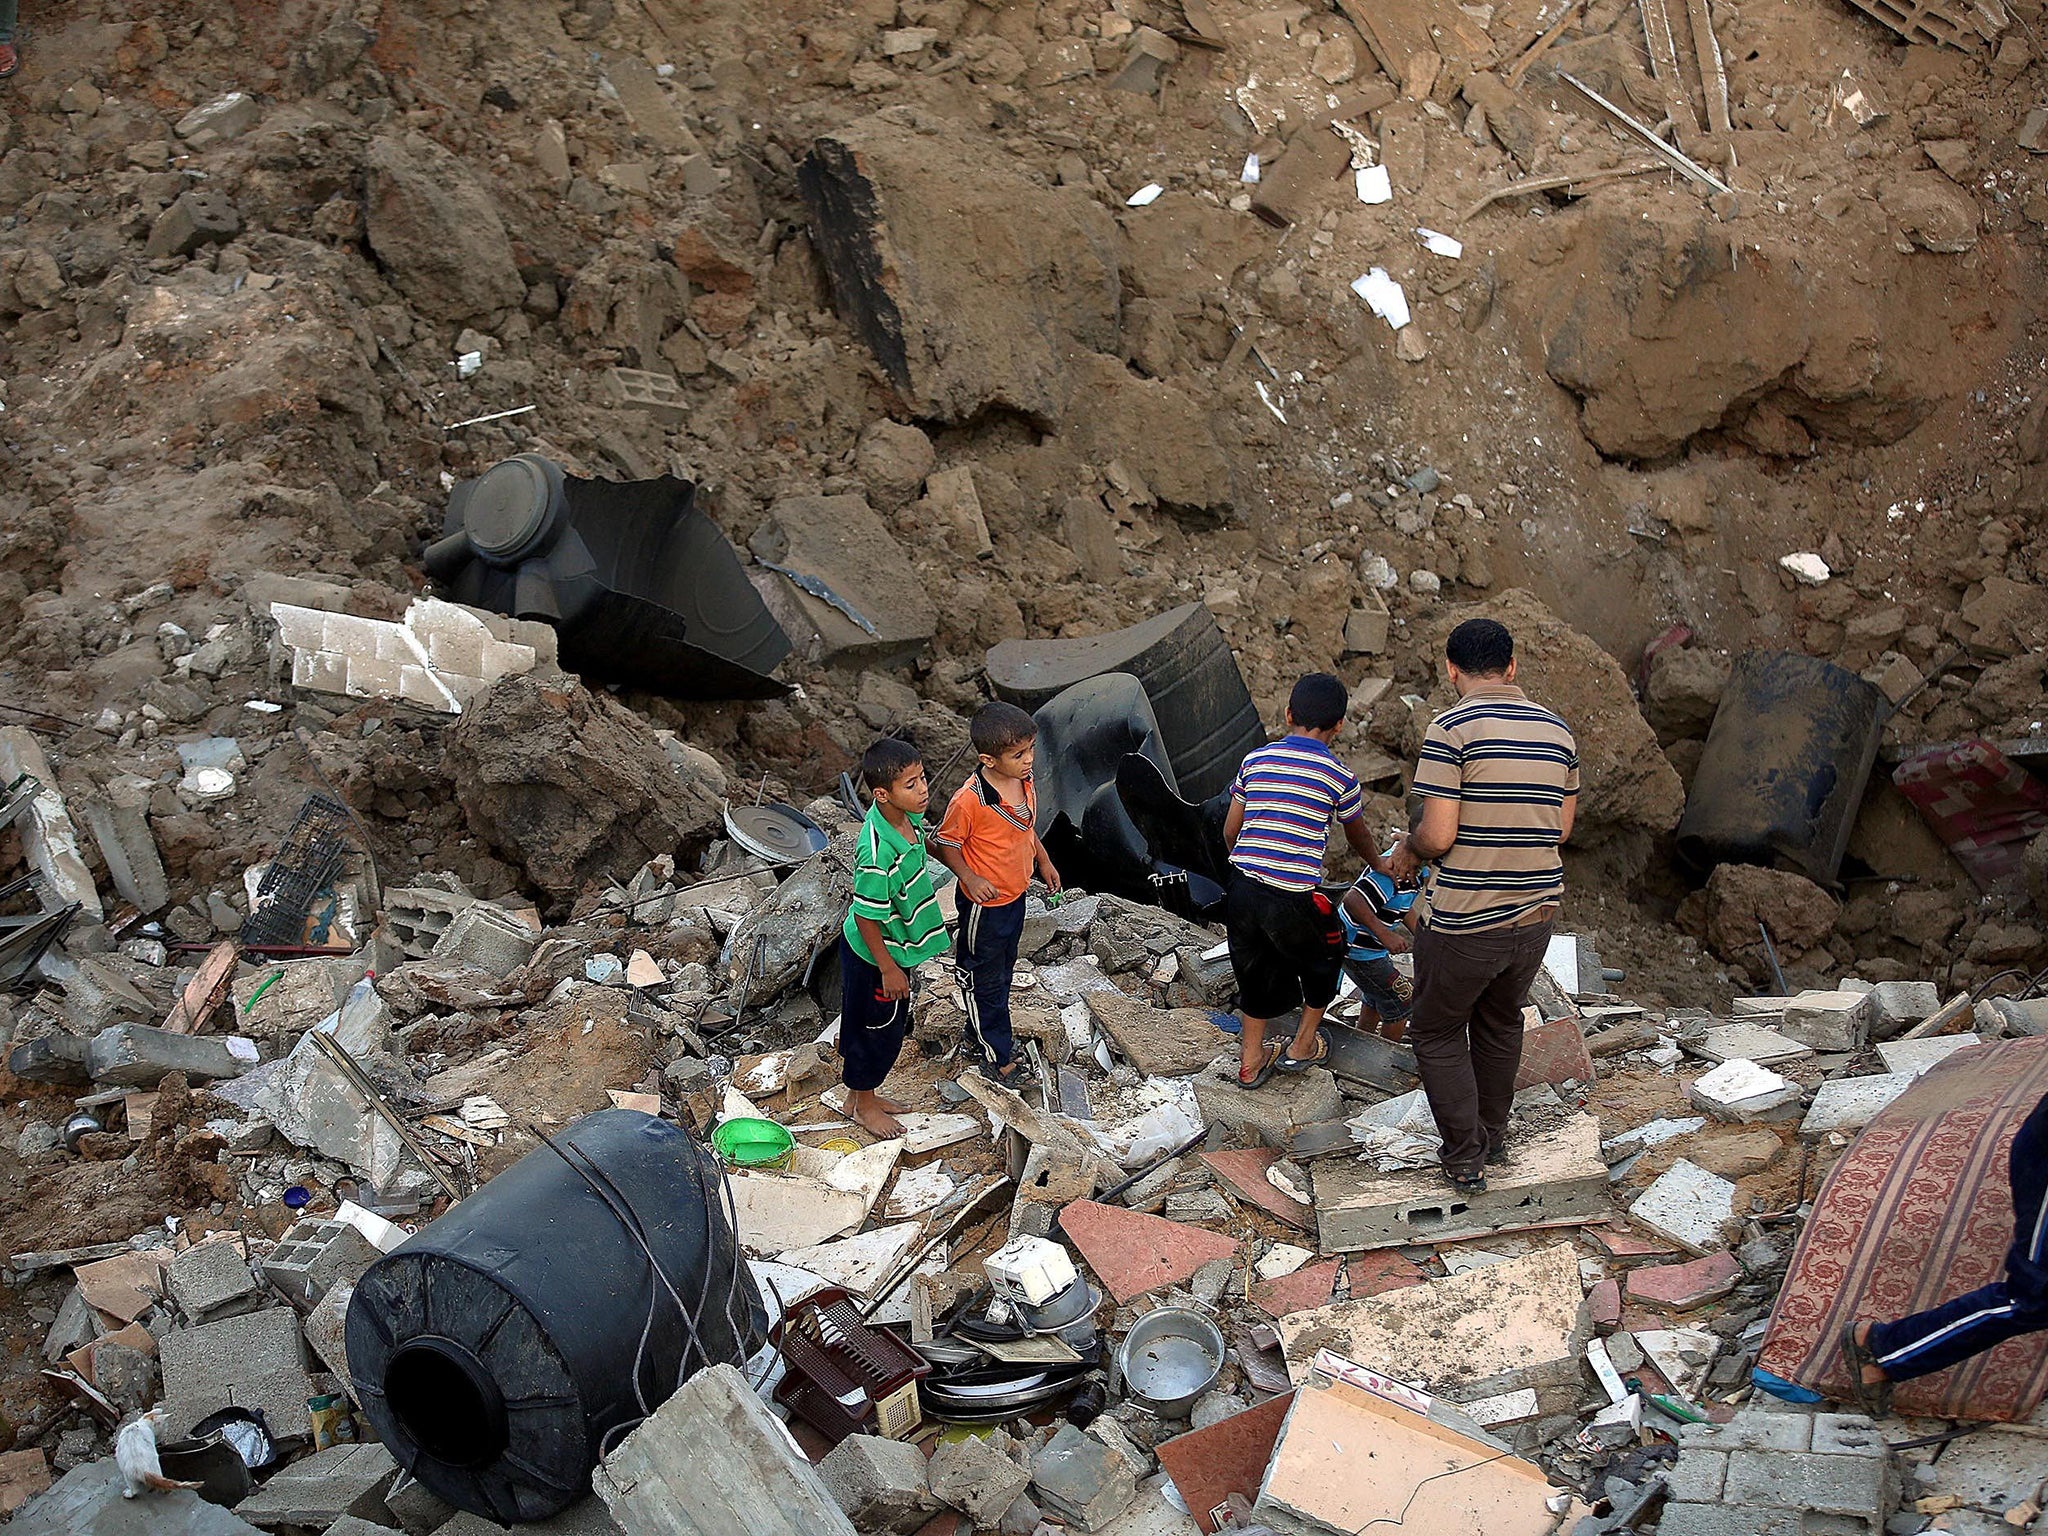 Beit Hanoun, a city on the northeast edge of the Gaza Strip, hit by Israeli airstrike, West Bank